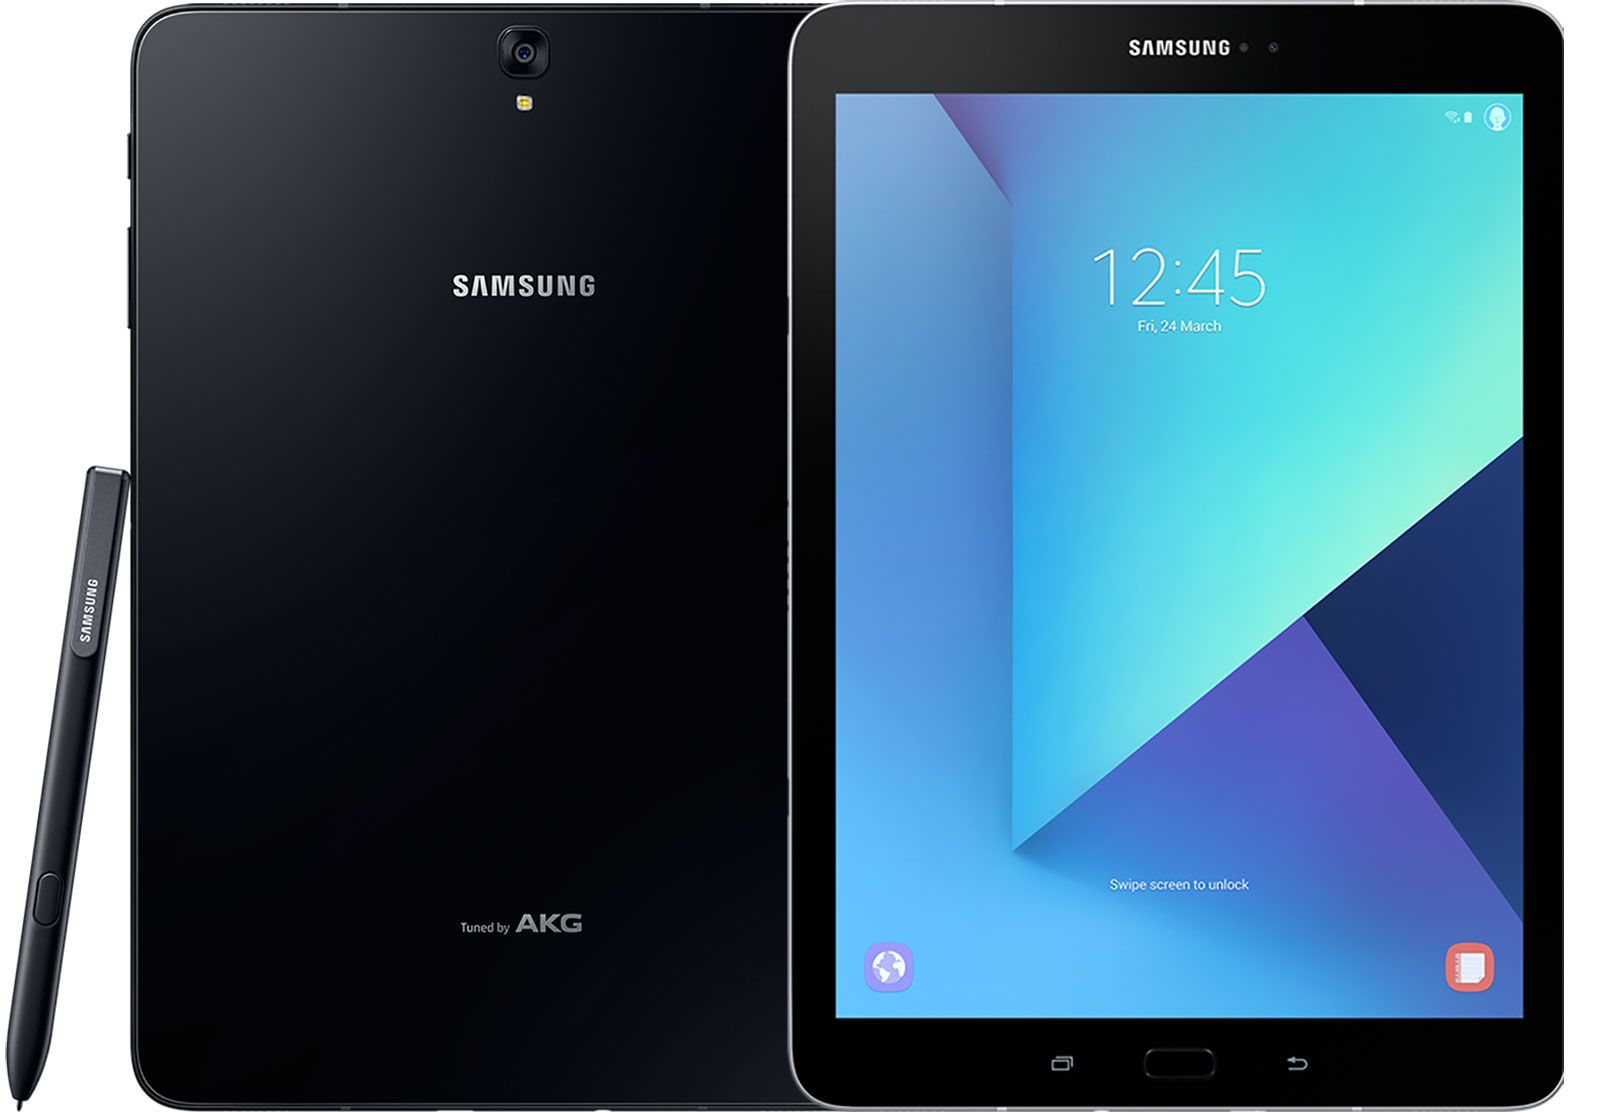 samsung launches galaxy tab s3 premium android tablet with s pen stylus image 1